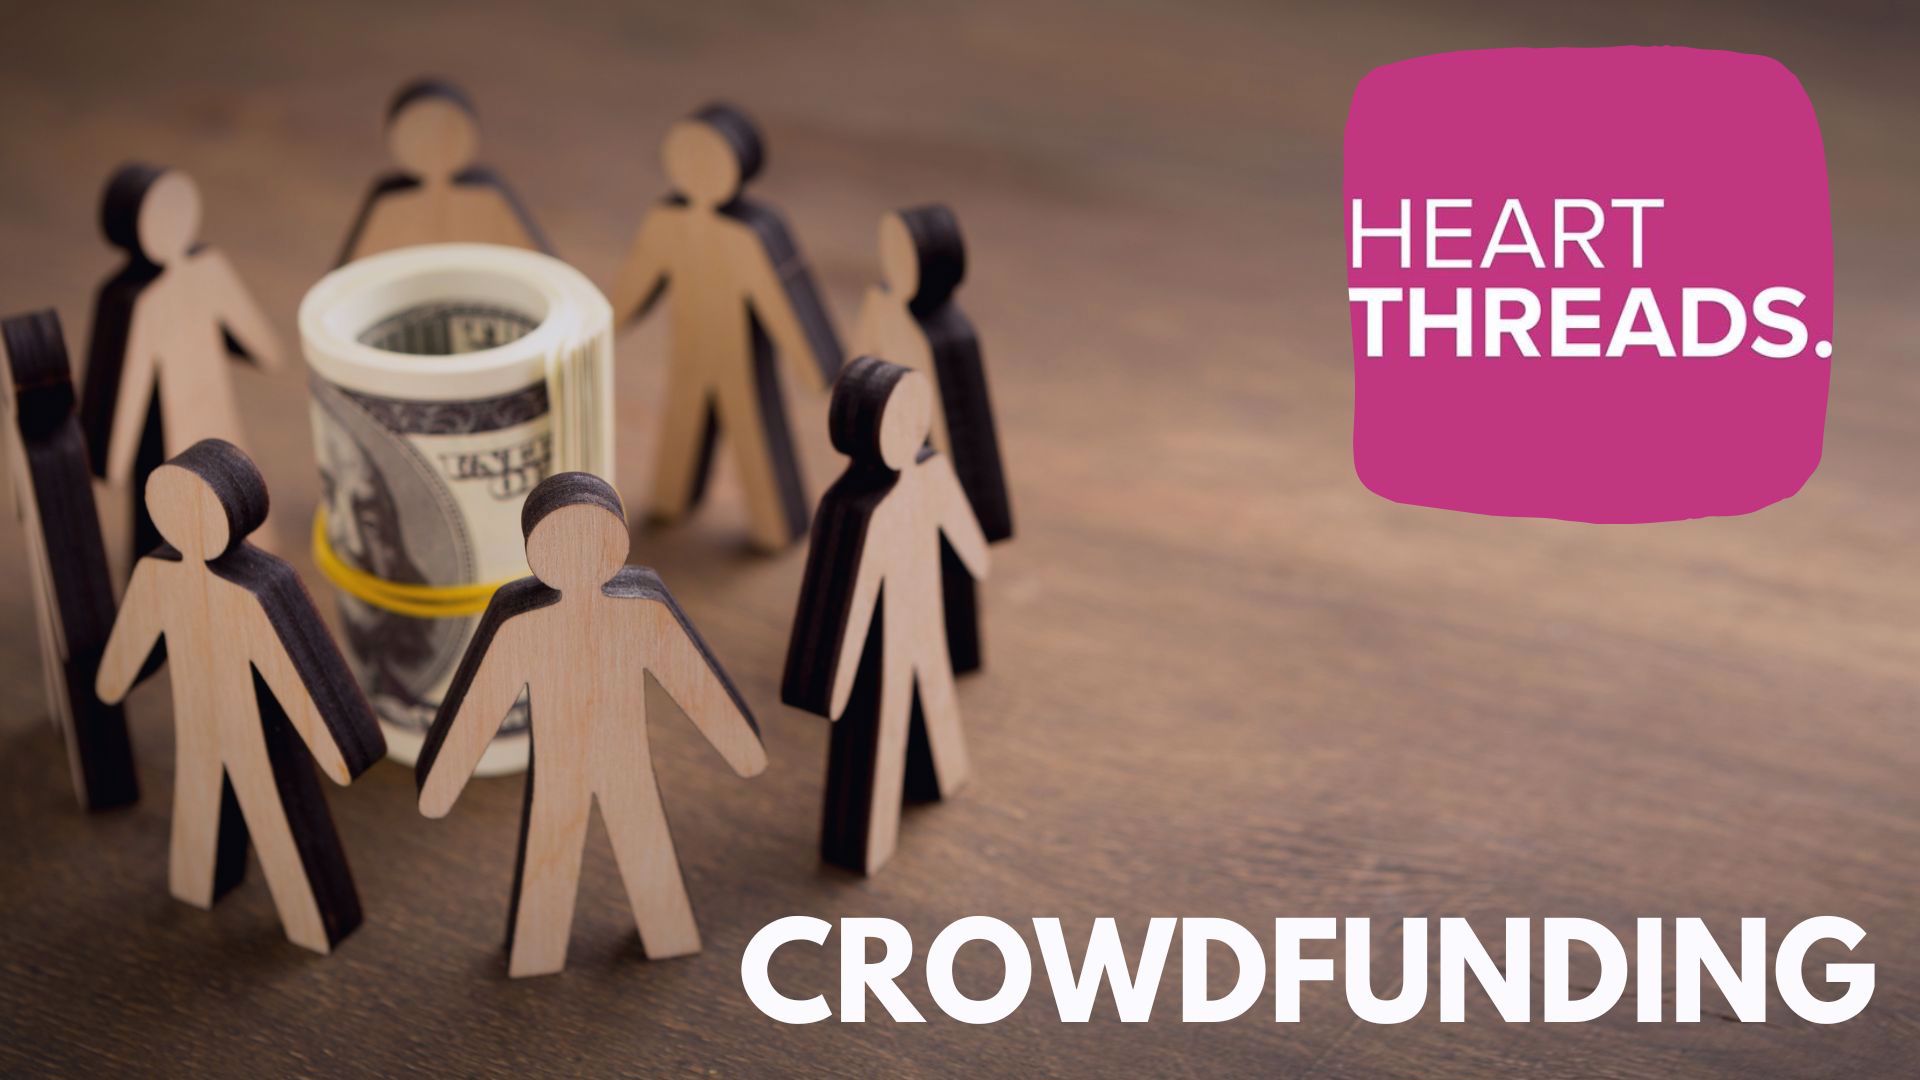 This collection of stories shines a light on people using crowdfunding platforms to support those in need.